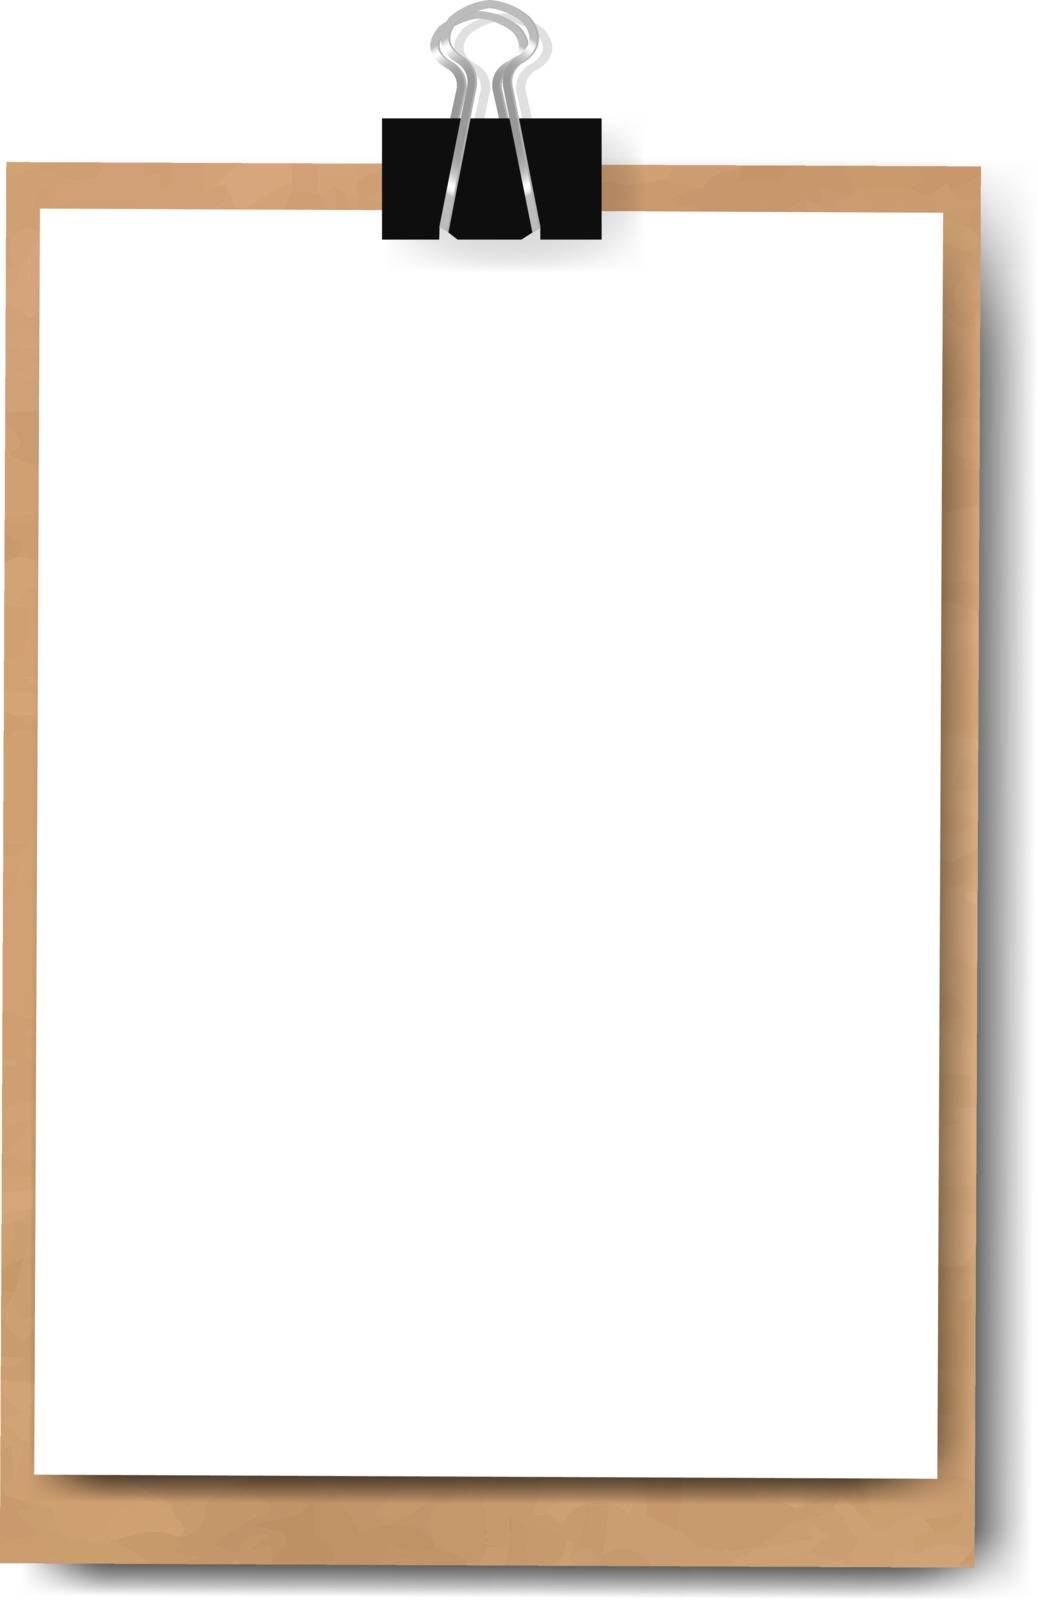 Realistic Clipboard Isolated With Gradient Mesh, Vector Illustration